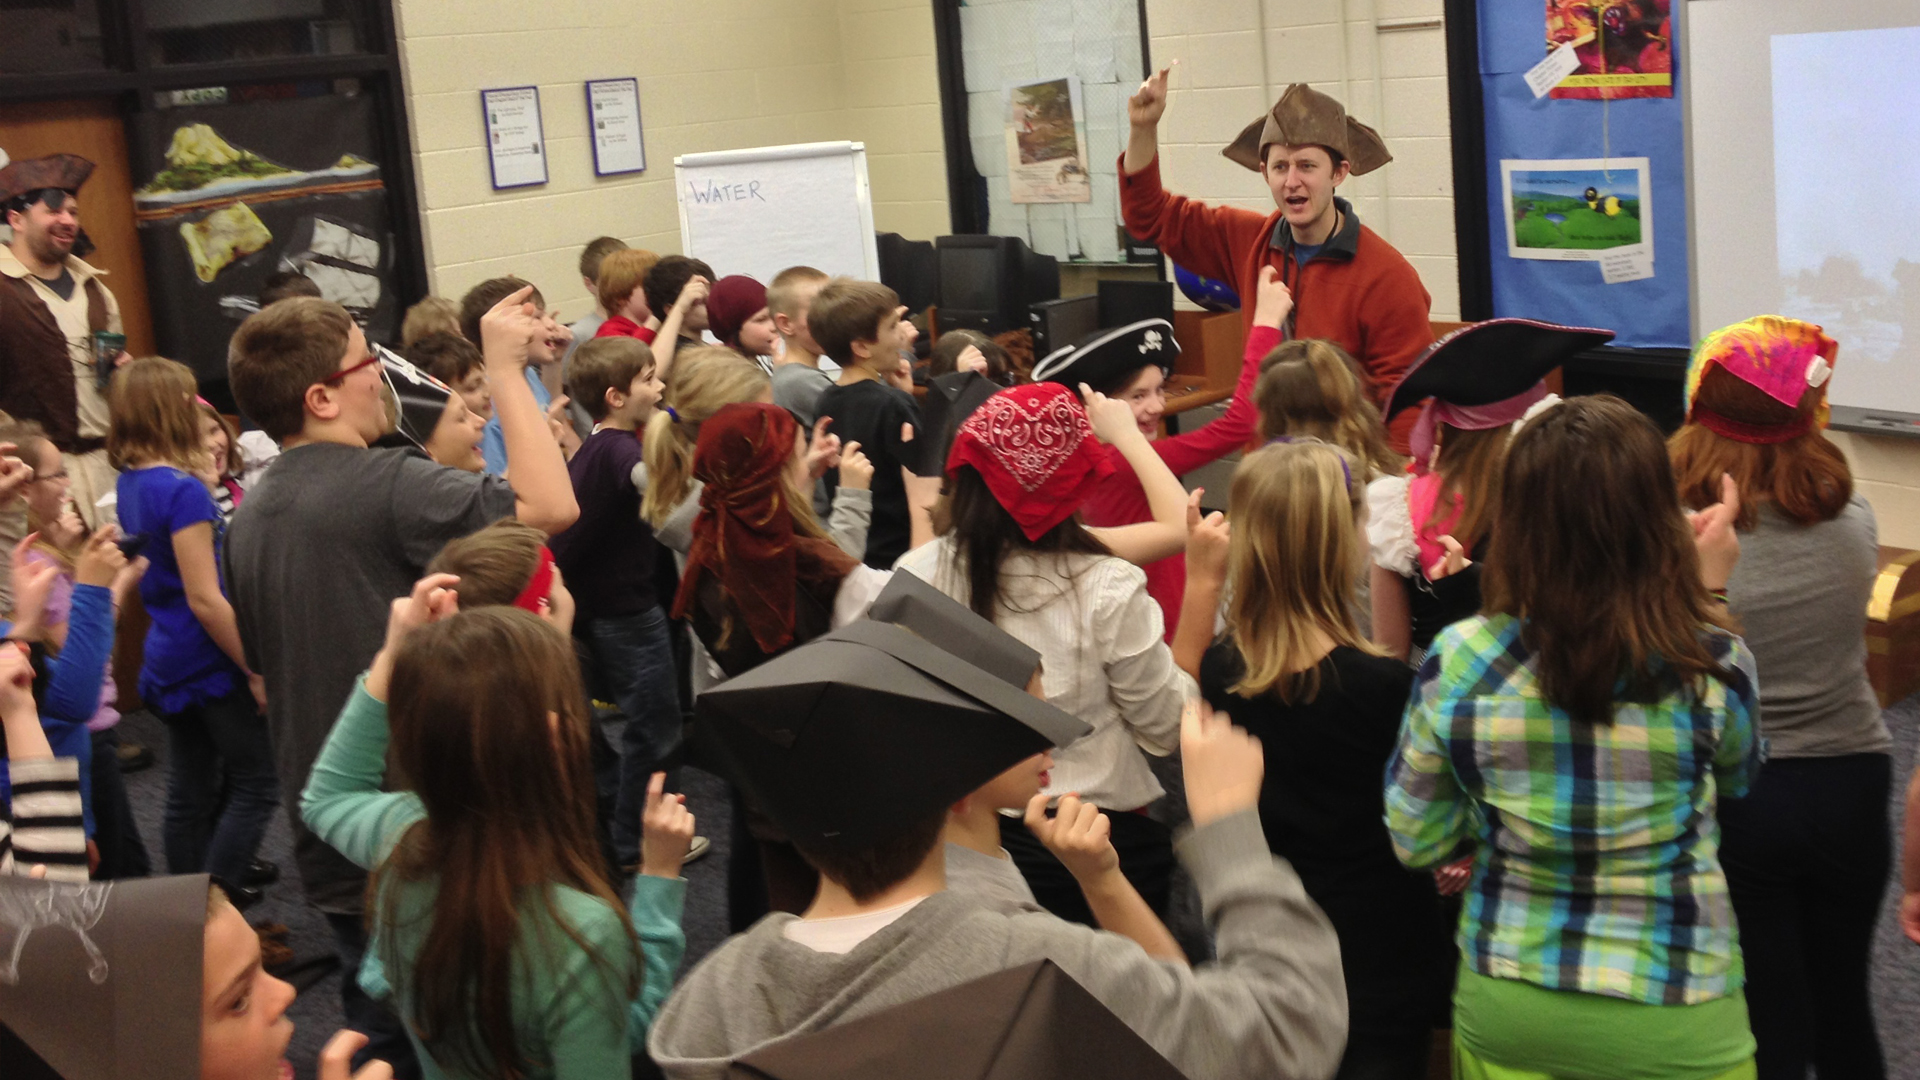 Laura and Robert Sams visit a Michigan school for a Pirate-themed Reading Month